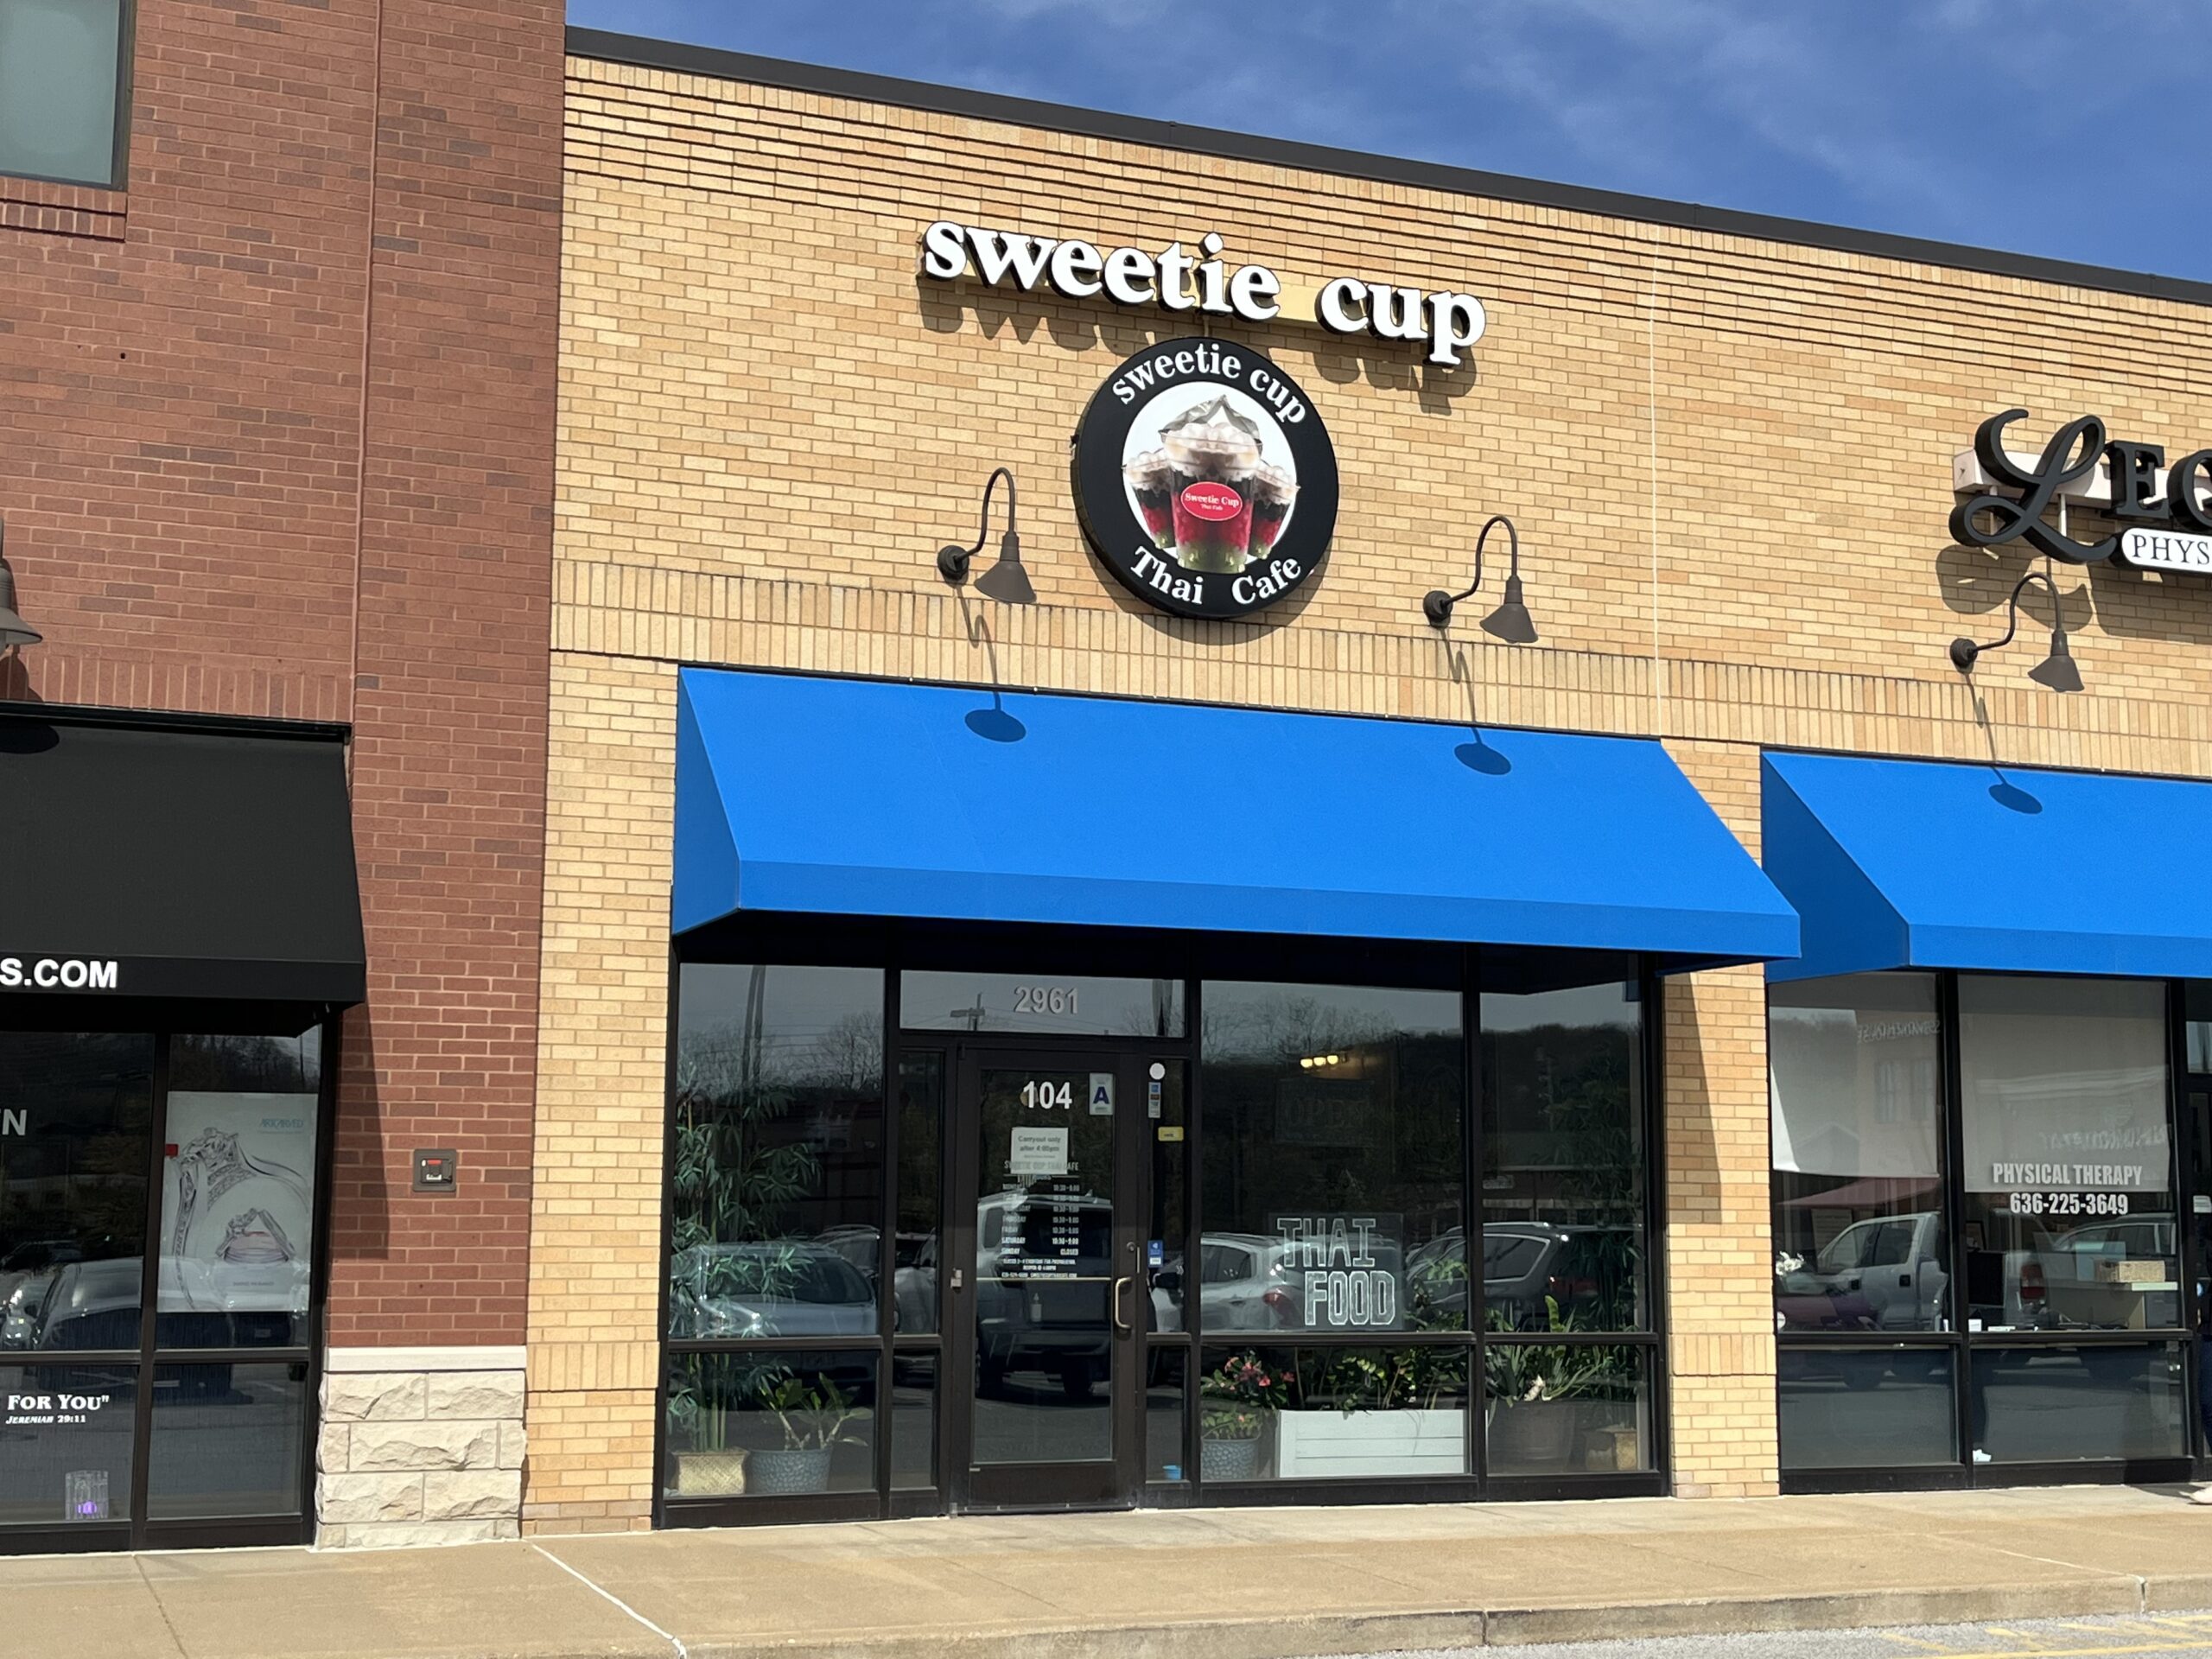 Sweetie Cup Thai Cafe Closes for Vacation